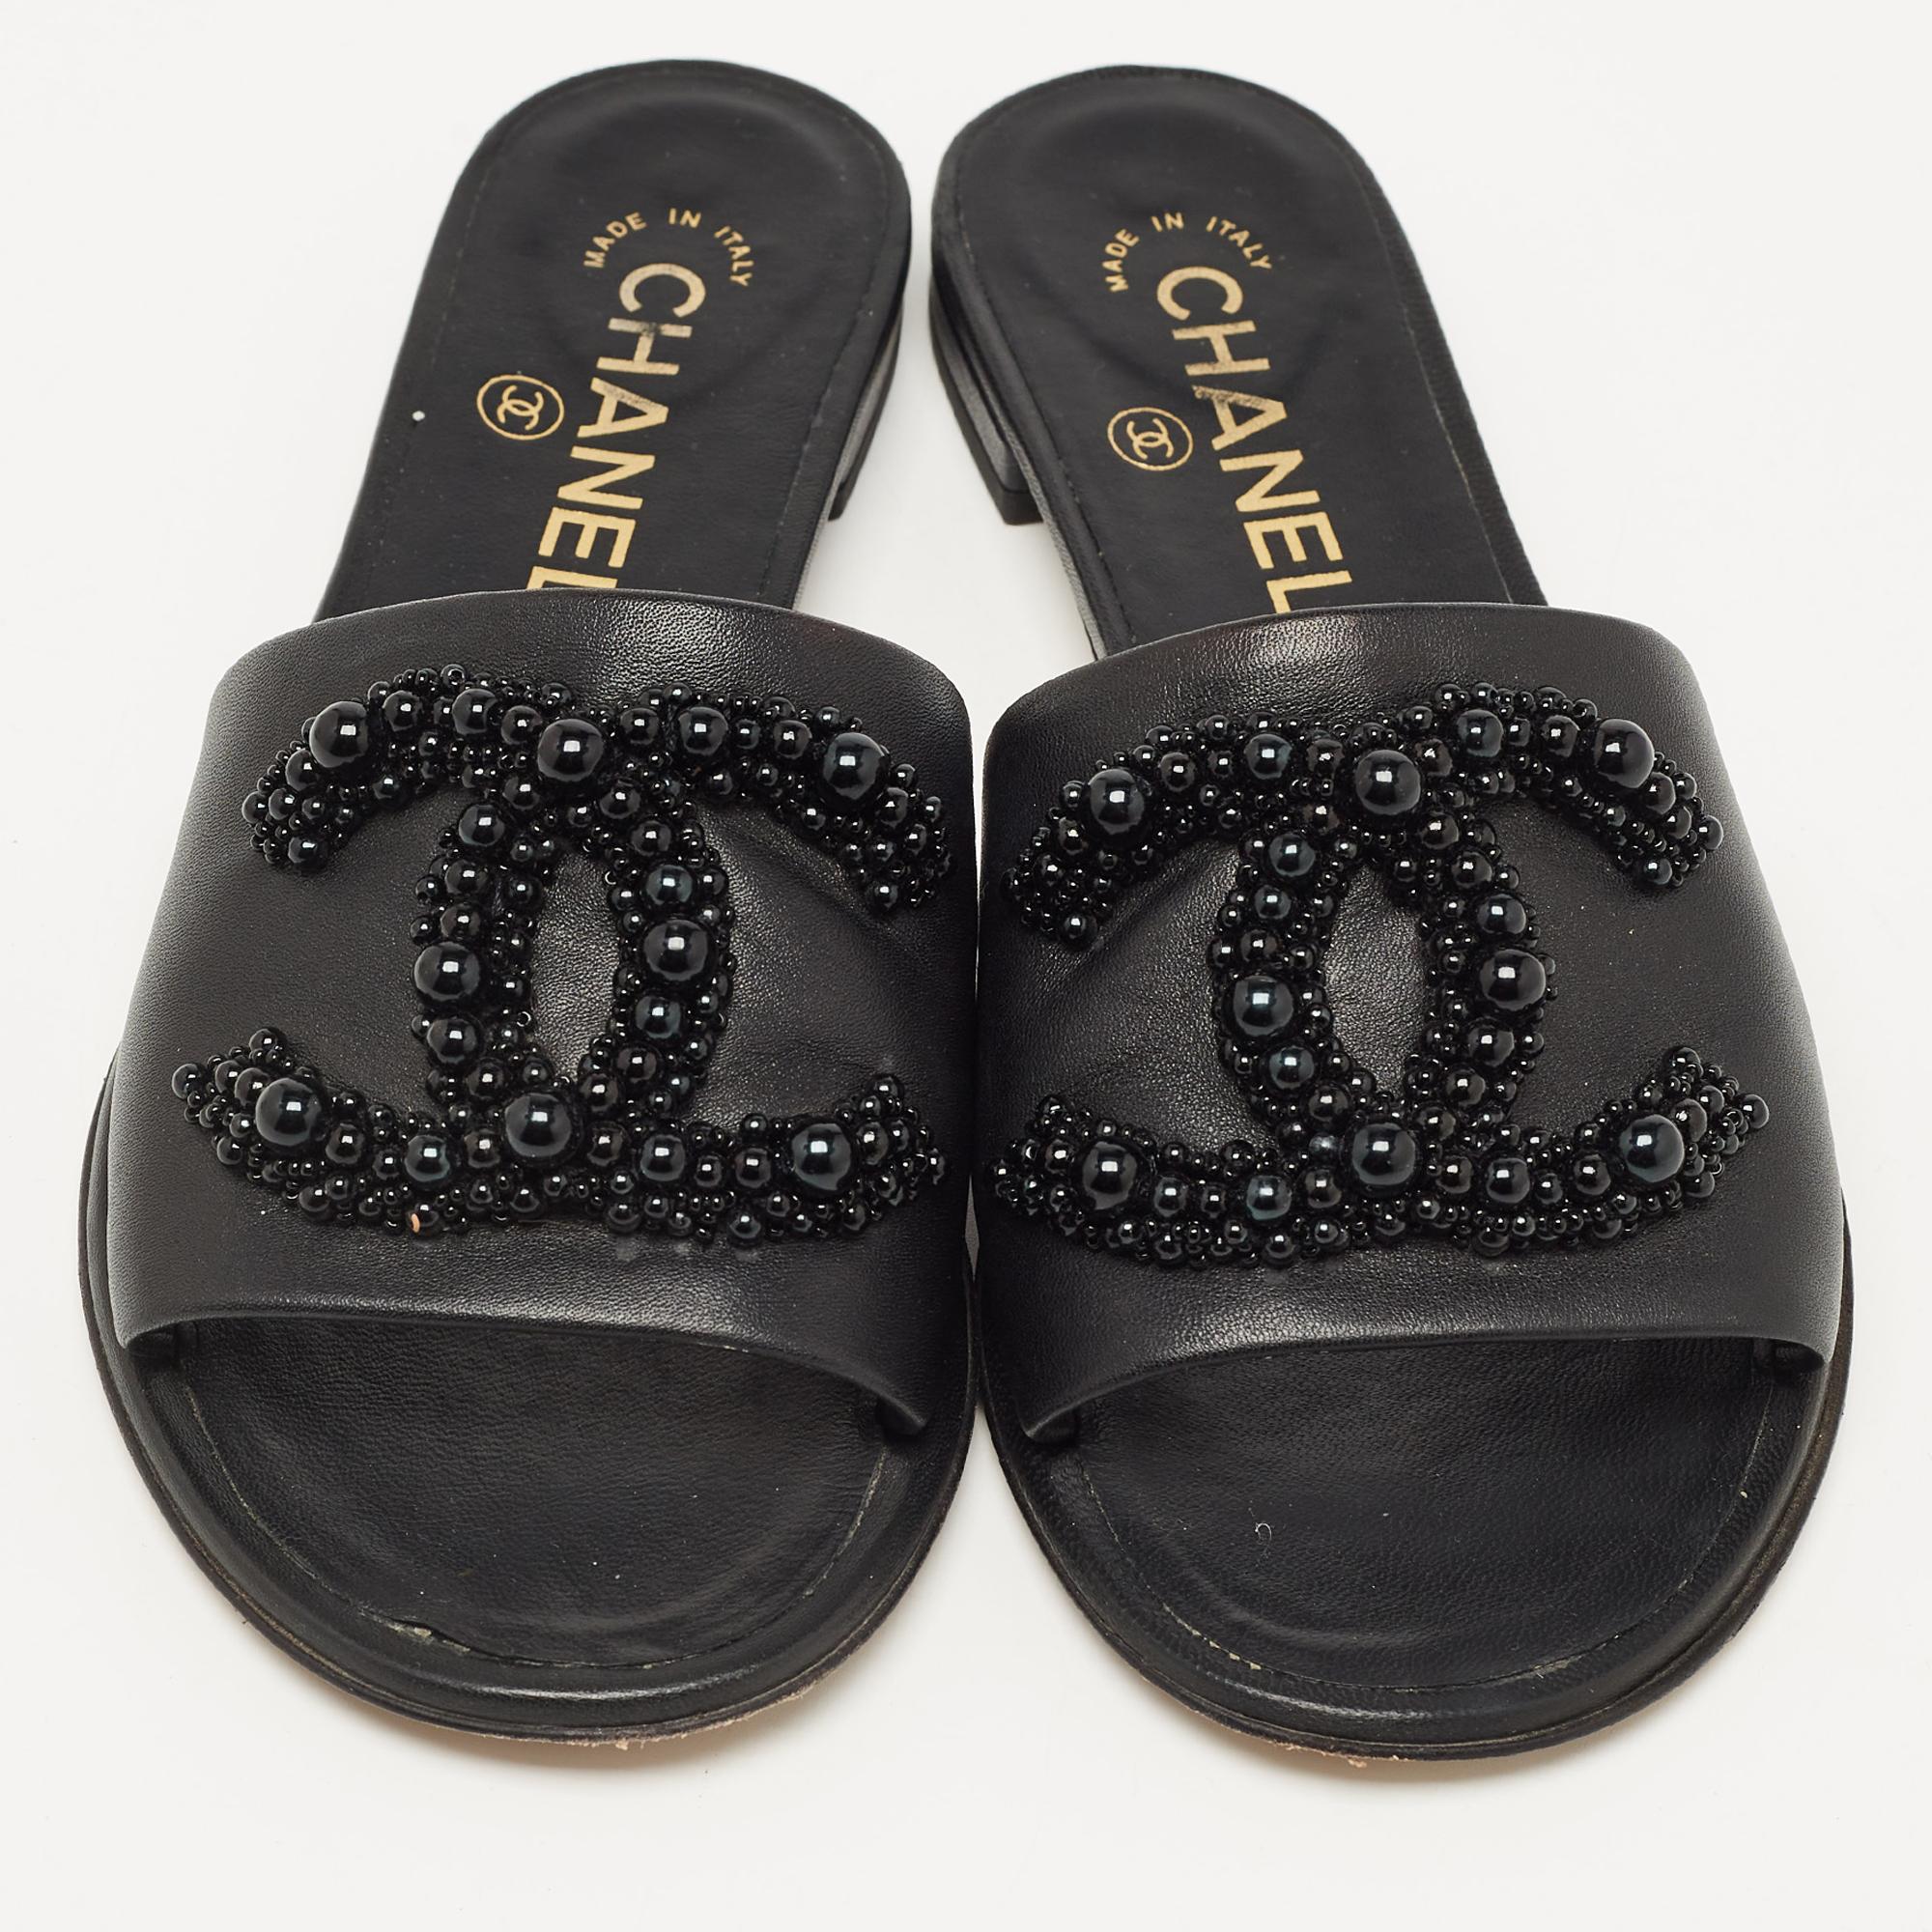 Enhance your casual looks with a touch of high style with these Chanel slides. Rendered in quality material with a lovely hue adorning its expanse, this pair is a must-have!

Includes: Original Dustbag, Original Box, Info Booklet

